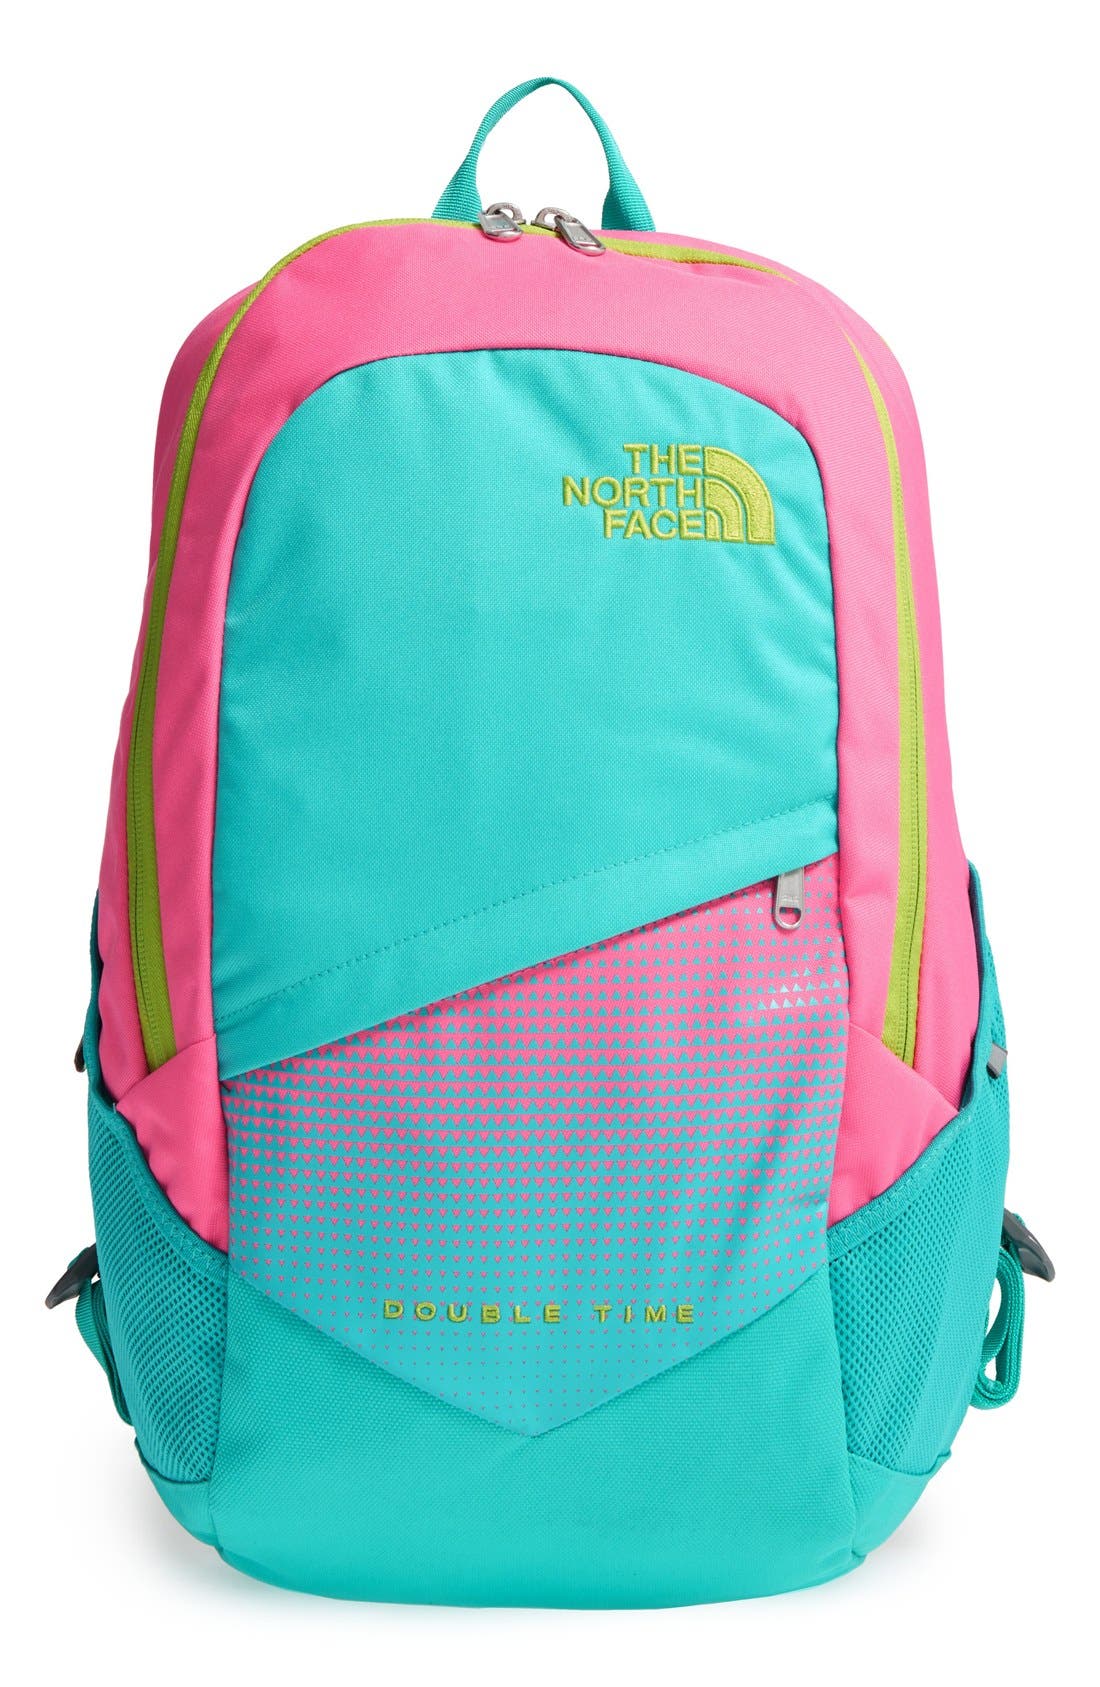 the north face kids backpack Online 